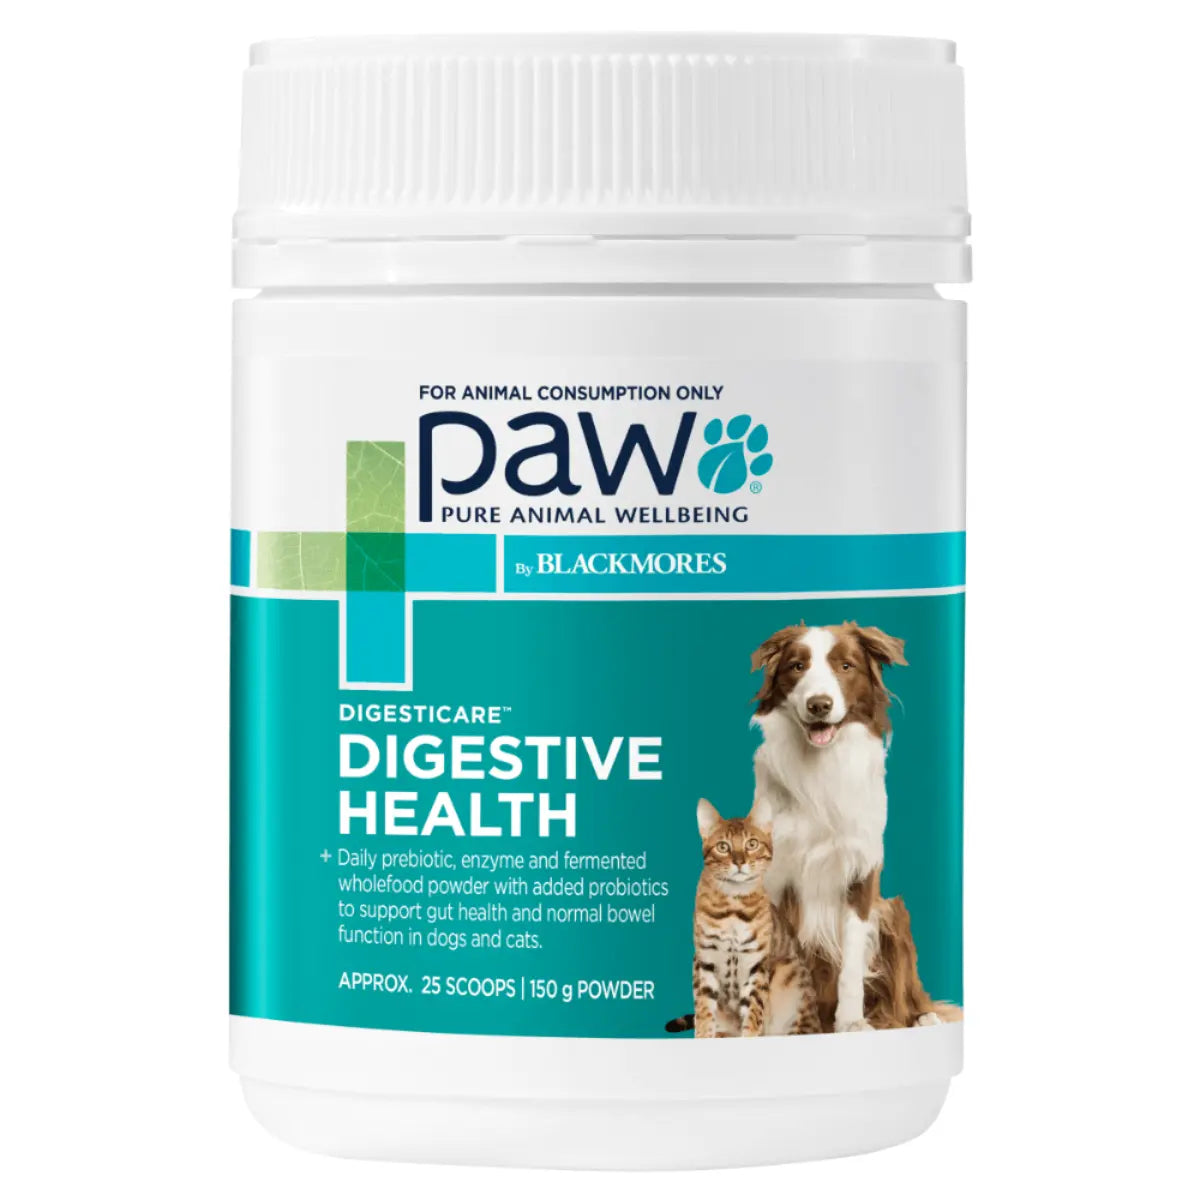 PAW - DigestiCare (Digestive Supplement for Dogs & Cats) 150g